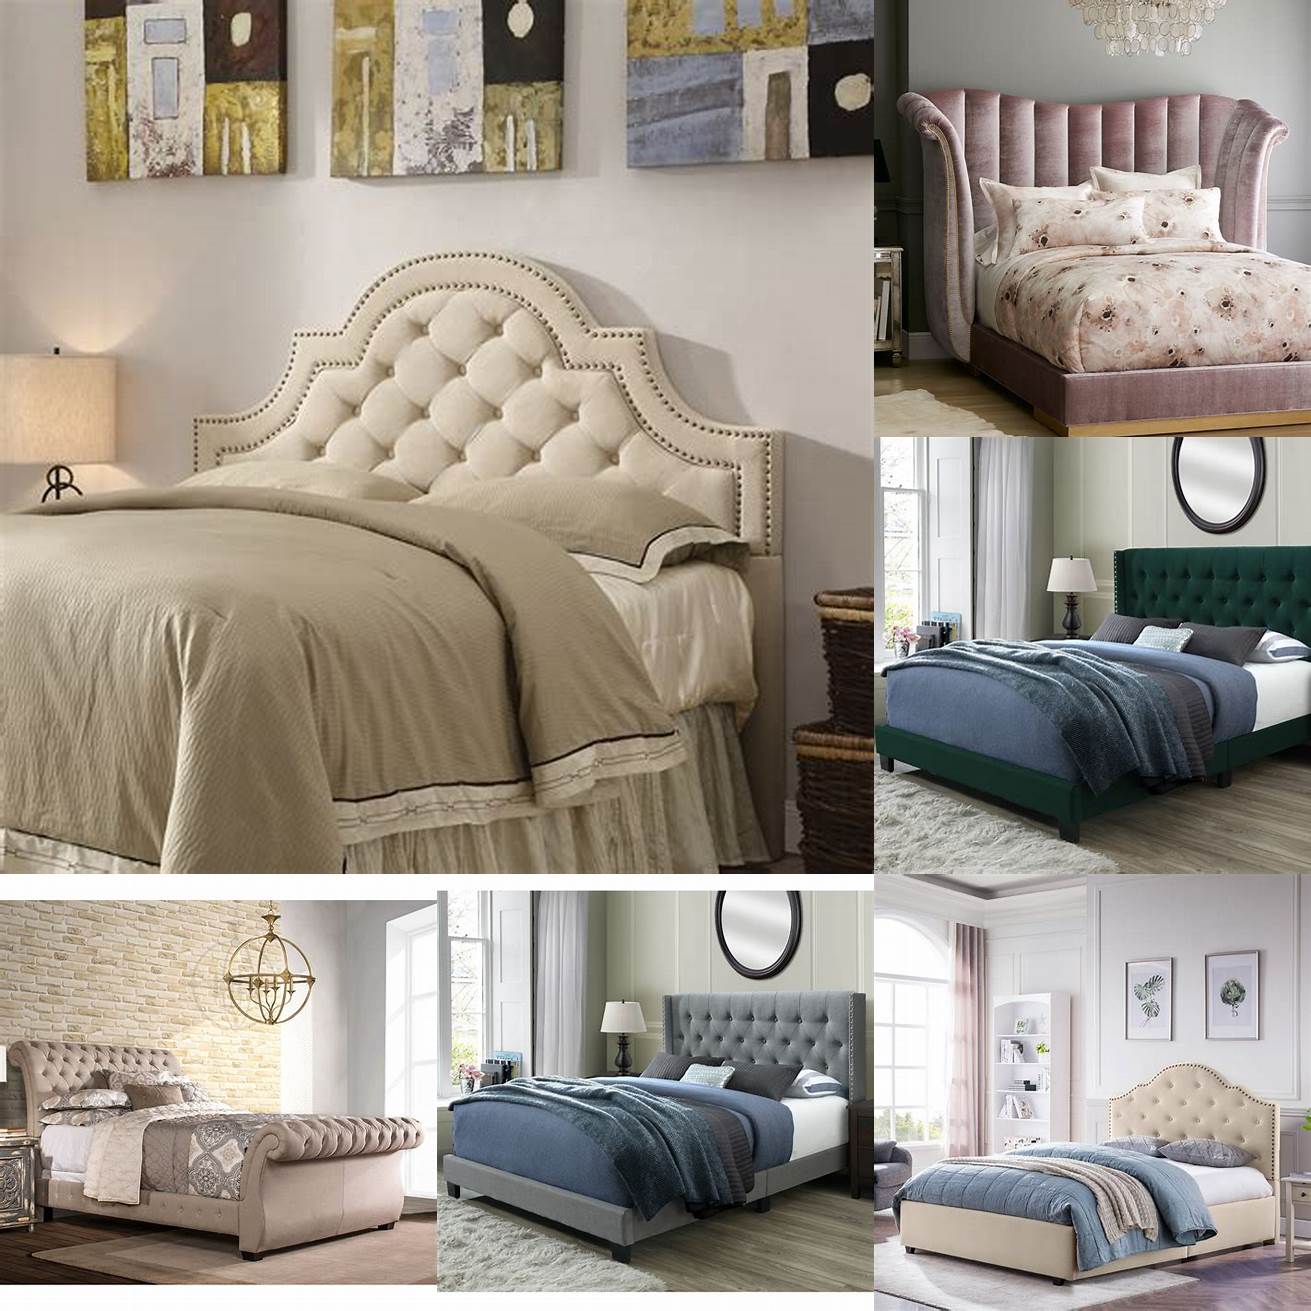 Versatility Tufted queen beds come in various styles and colors making it easy to find one that fits your personal taste and bedroom décor